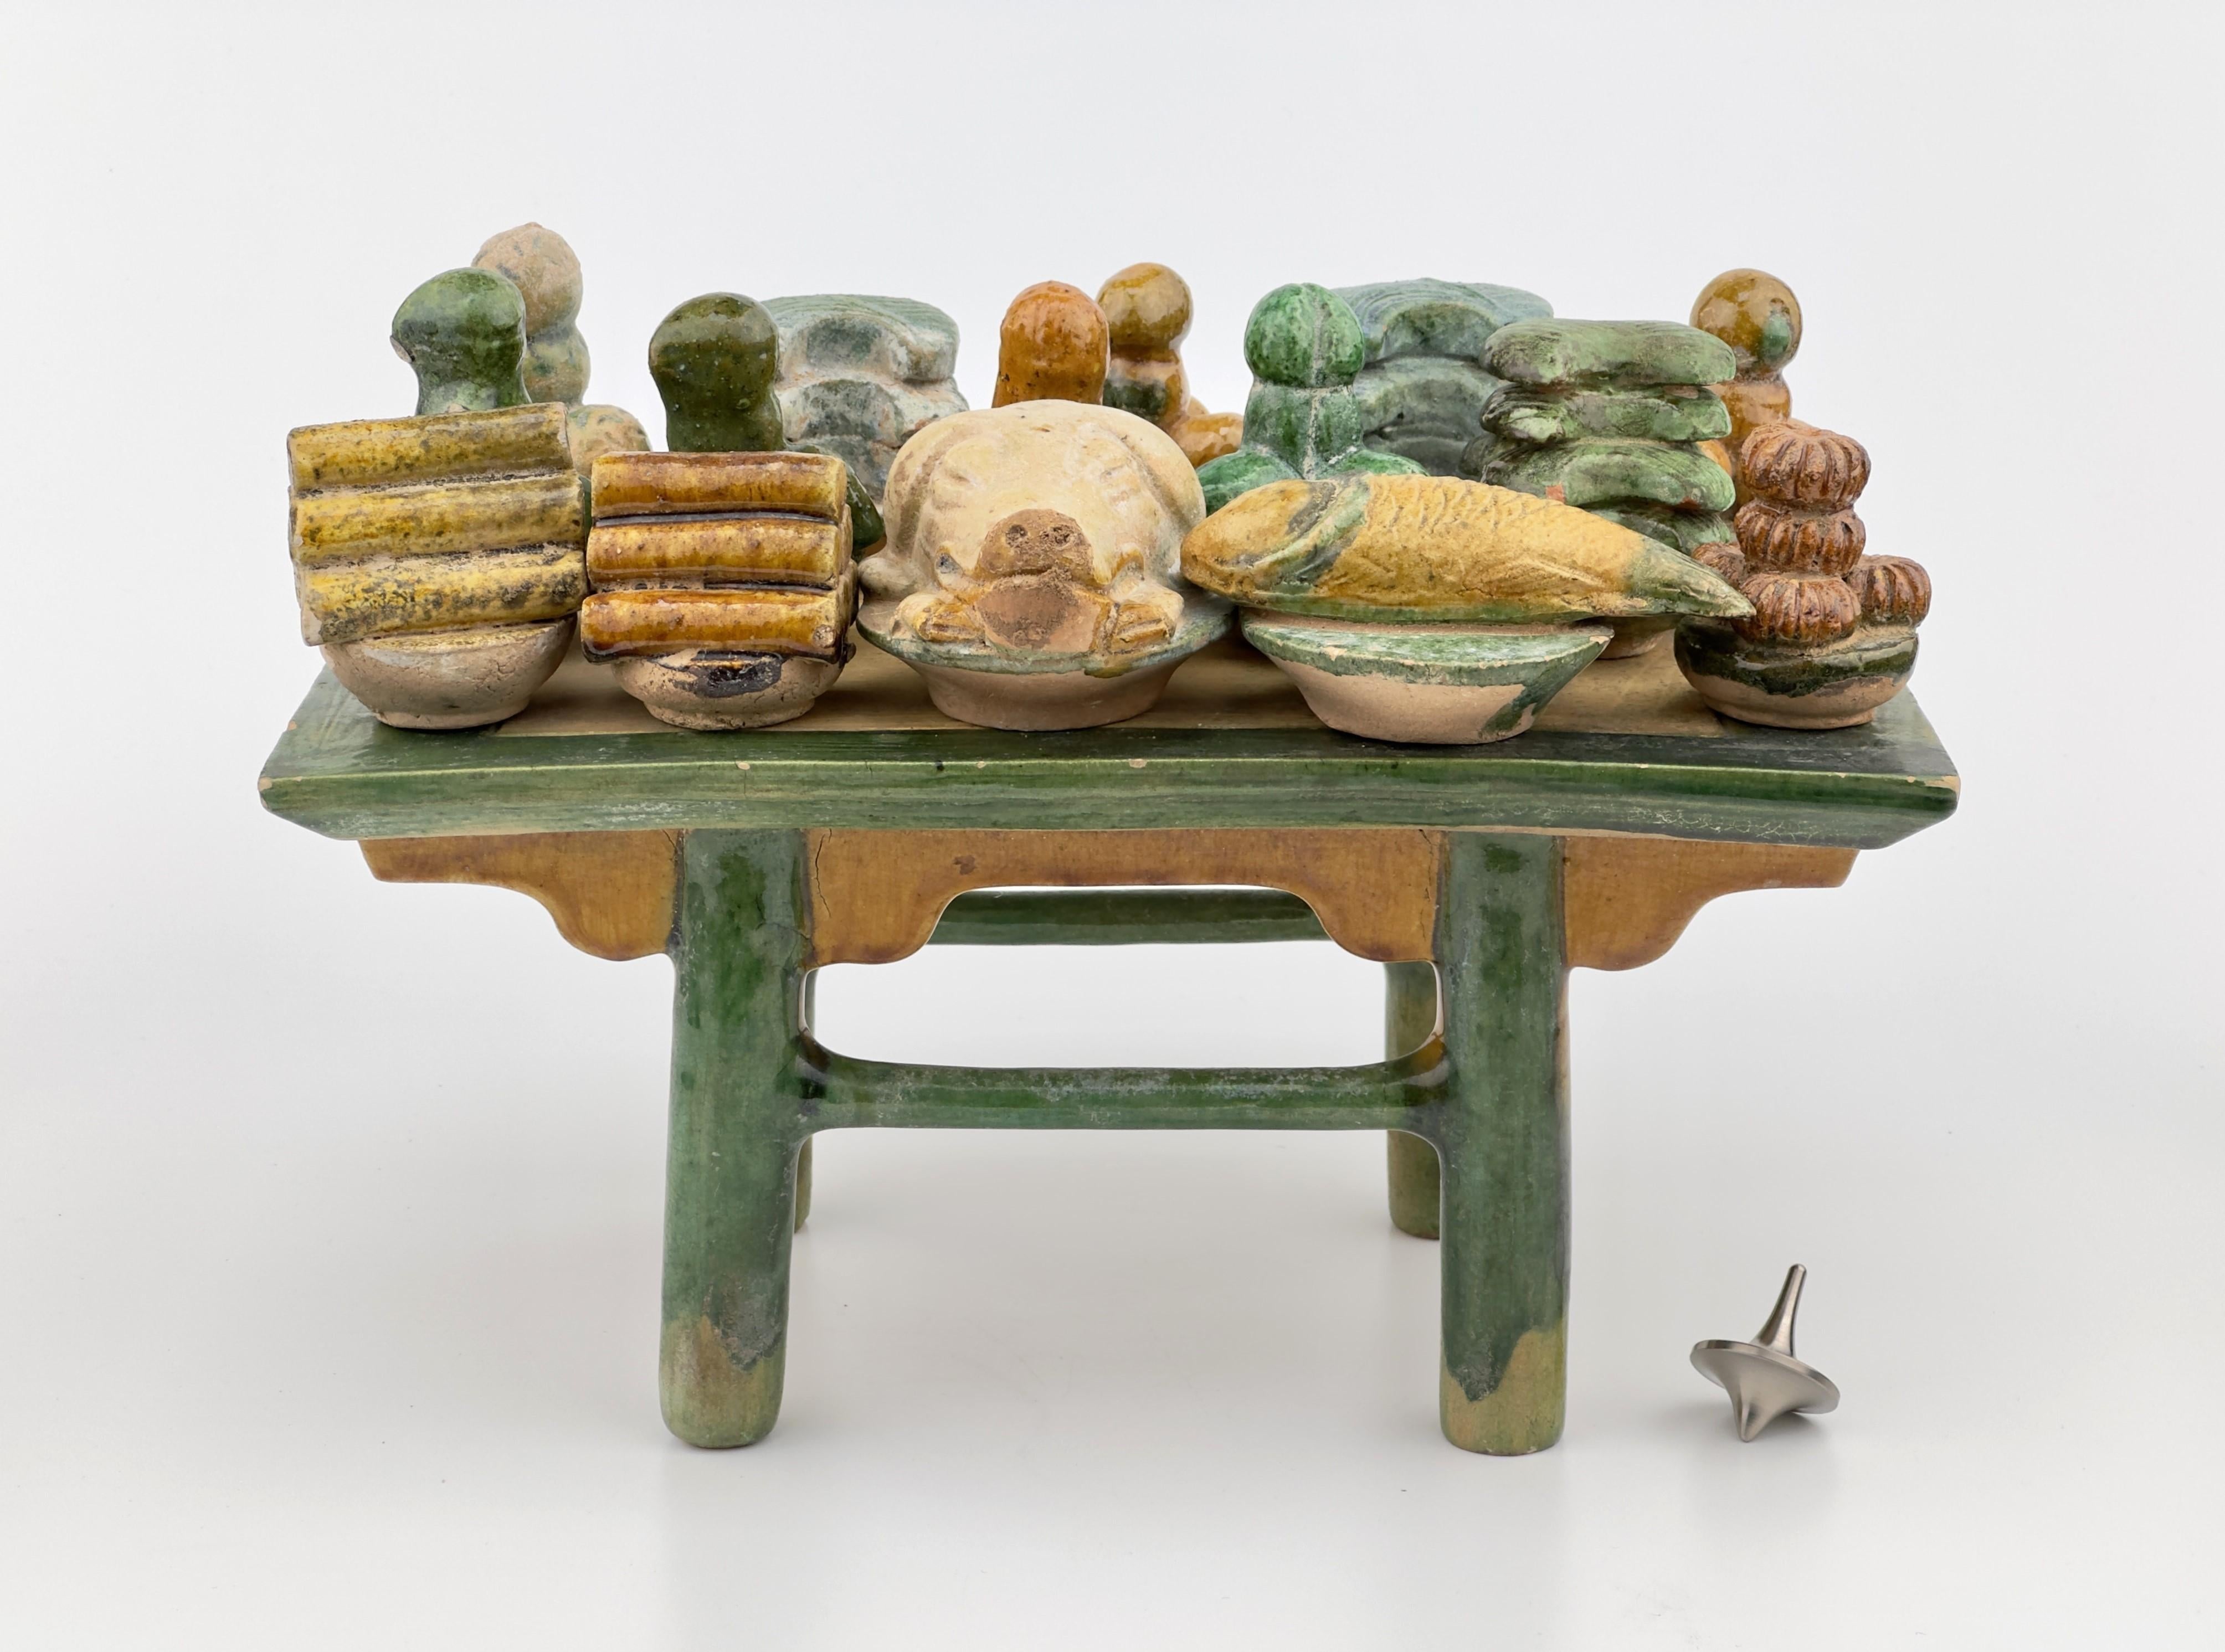 The table bearing pig head, rice cakes, dishes of meat, fish and fruit. Known as Mingqi, these terracotta models were customarily included in Chinese burial practices, particularly among the affluent, to aid the deceased in their journey through the